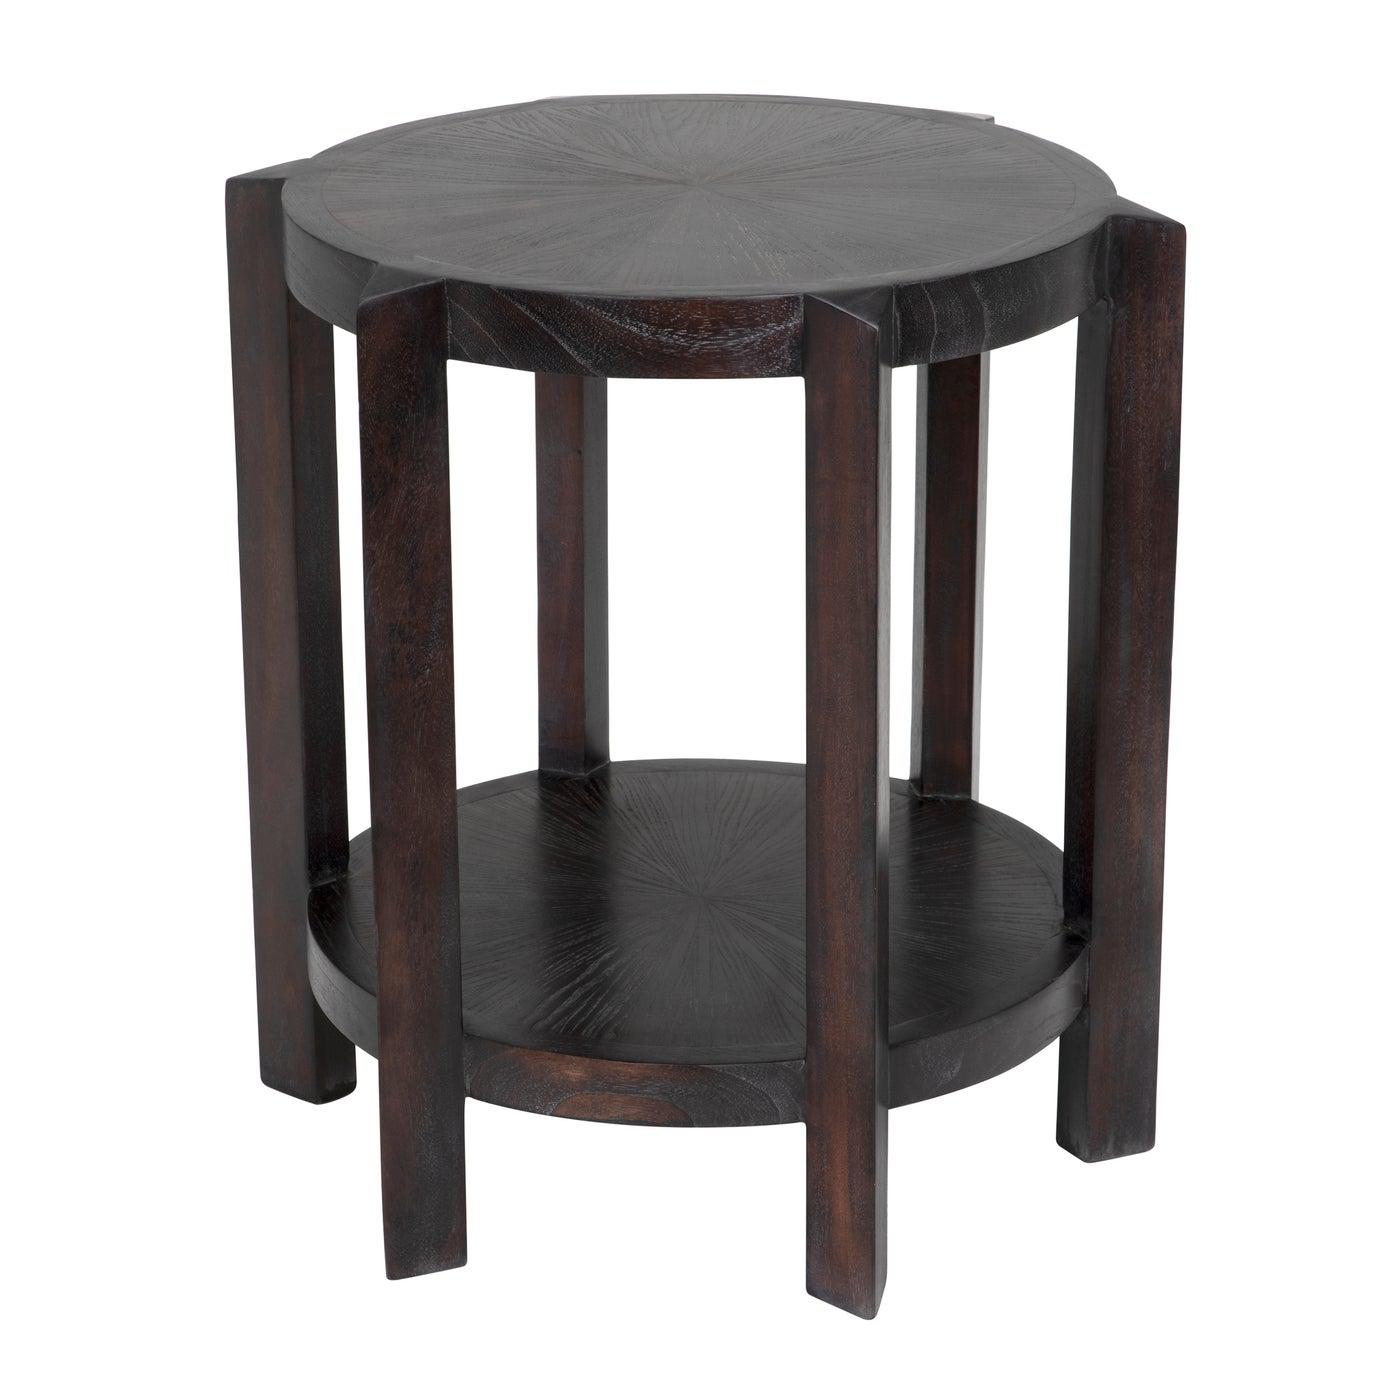 Yuhuda Small Side Table, Sombre Finish